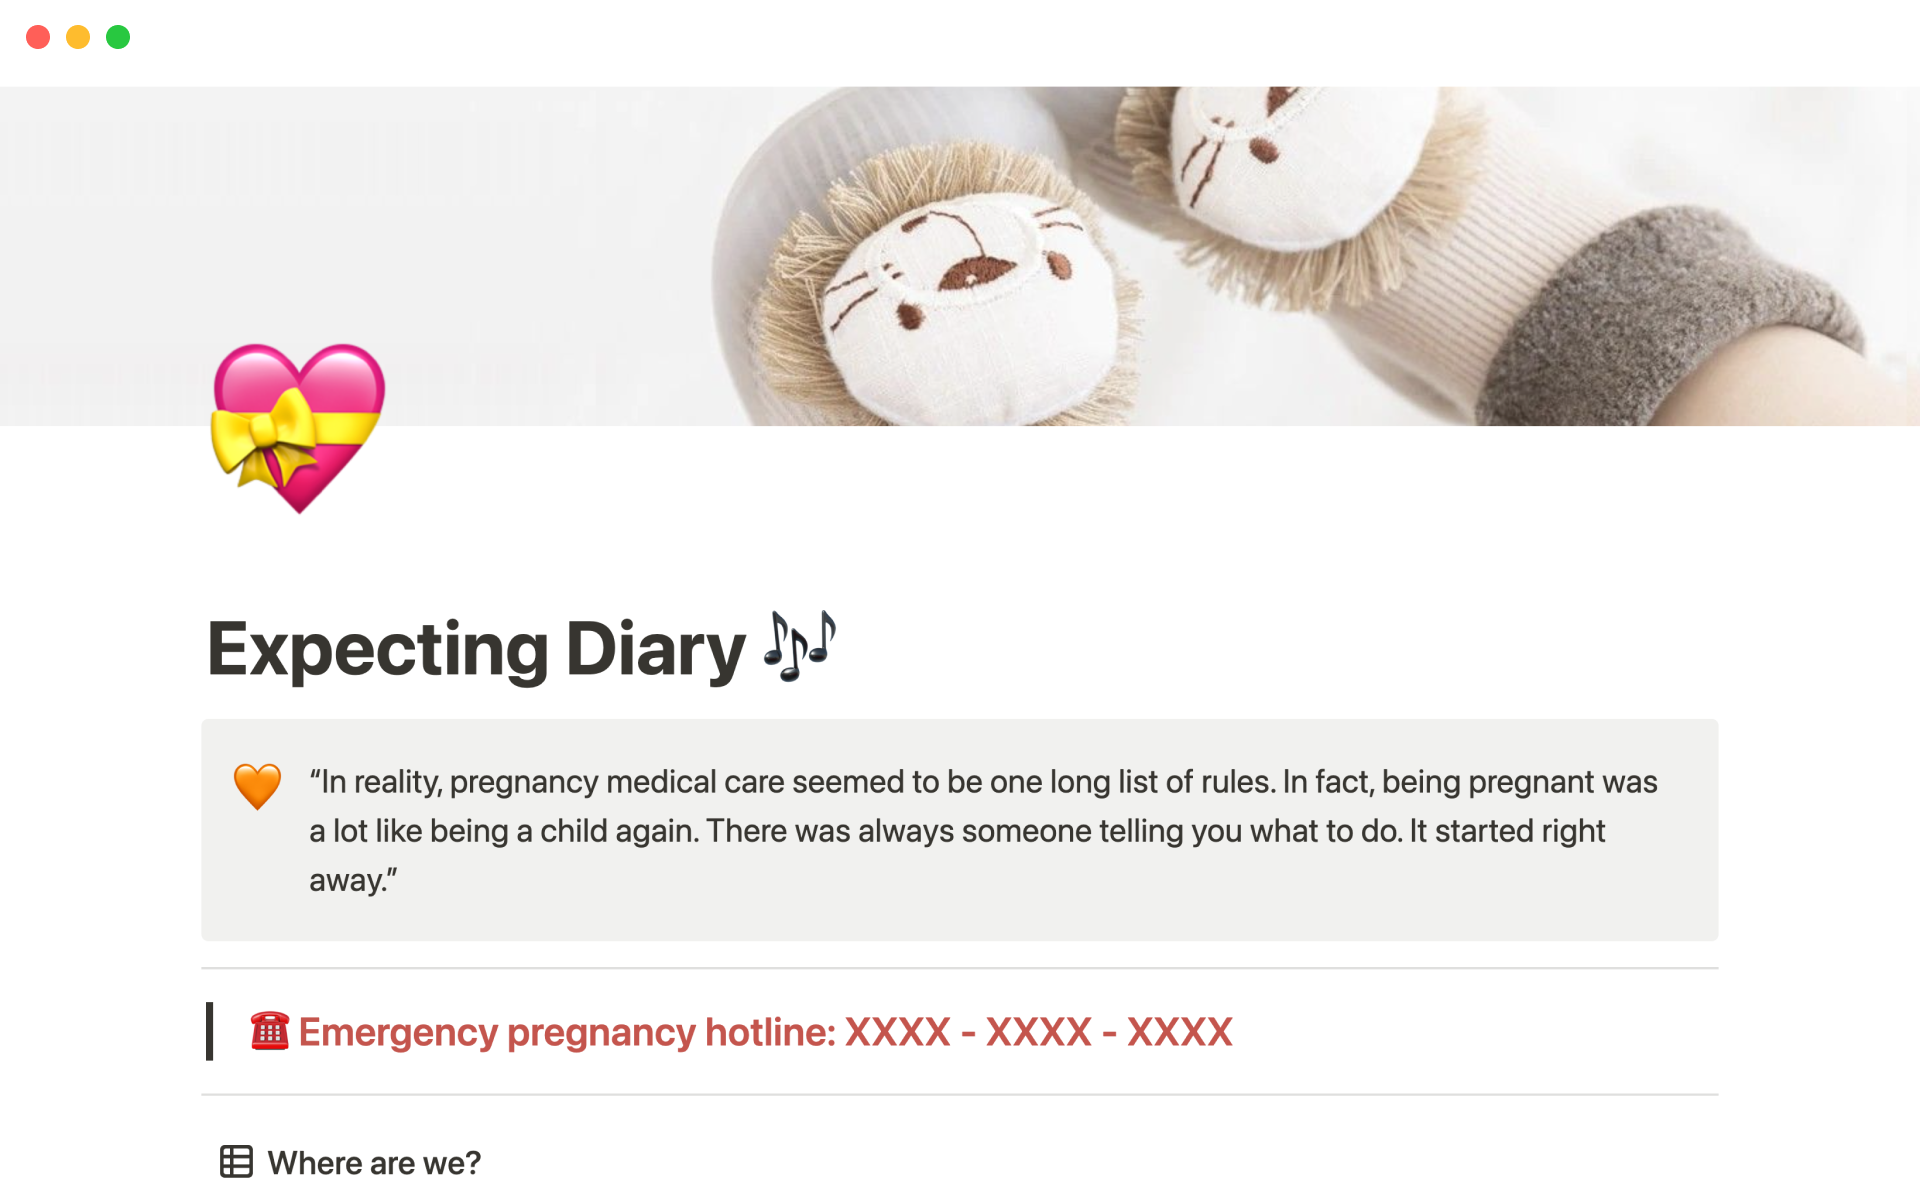 A diary for expecting mothers, to have fun waiting for your little one!